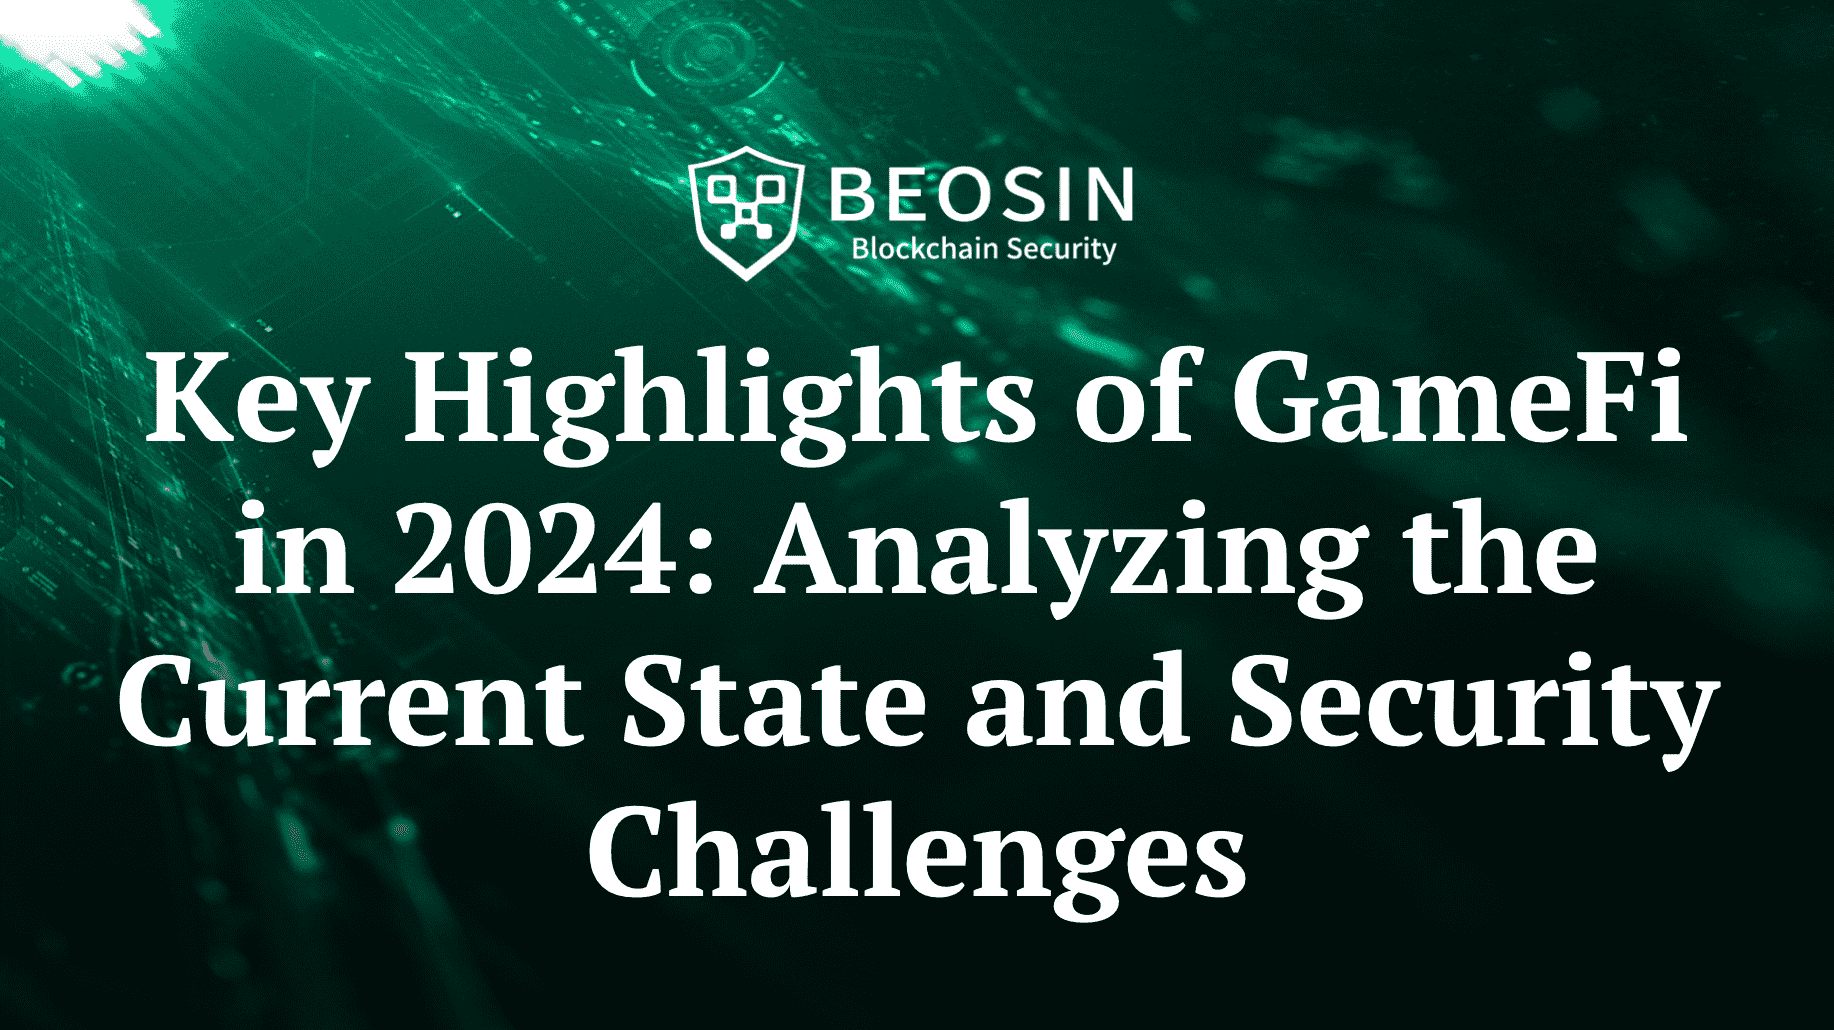 Key Highlights of GameFi in 2024: Analyzing the Current State and Security Challenges